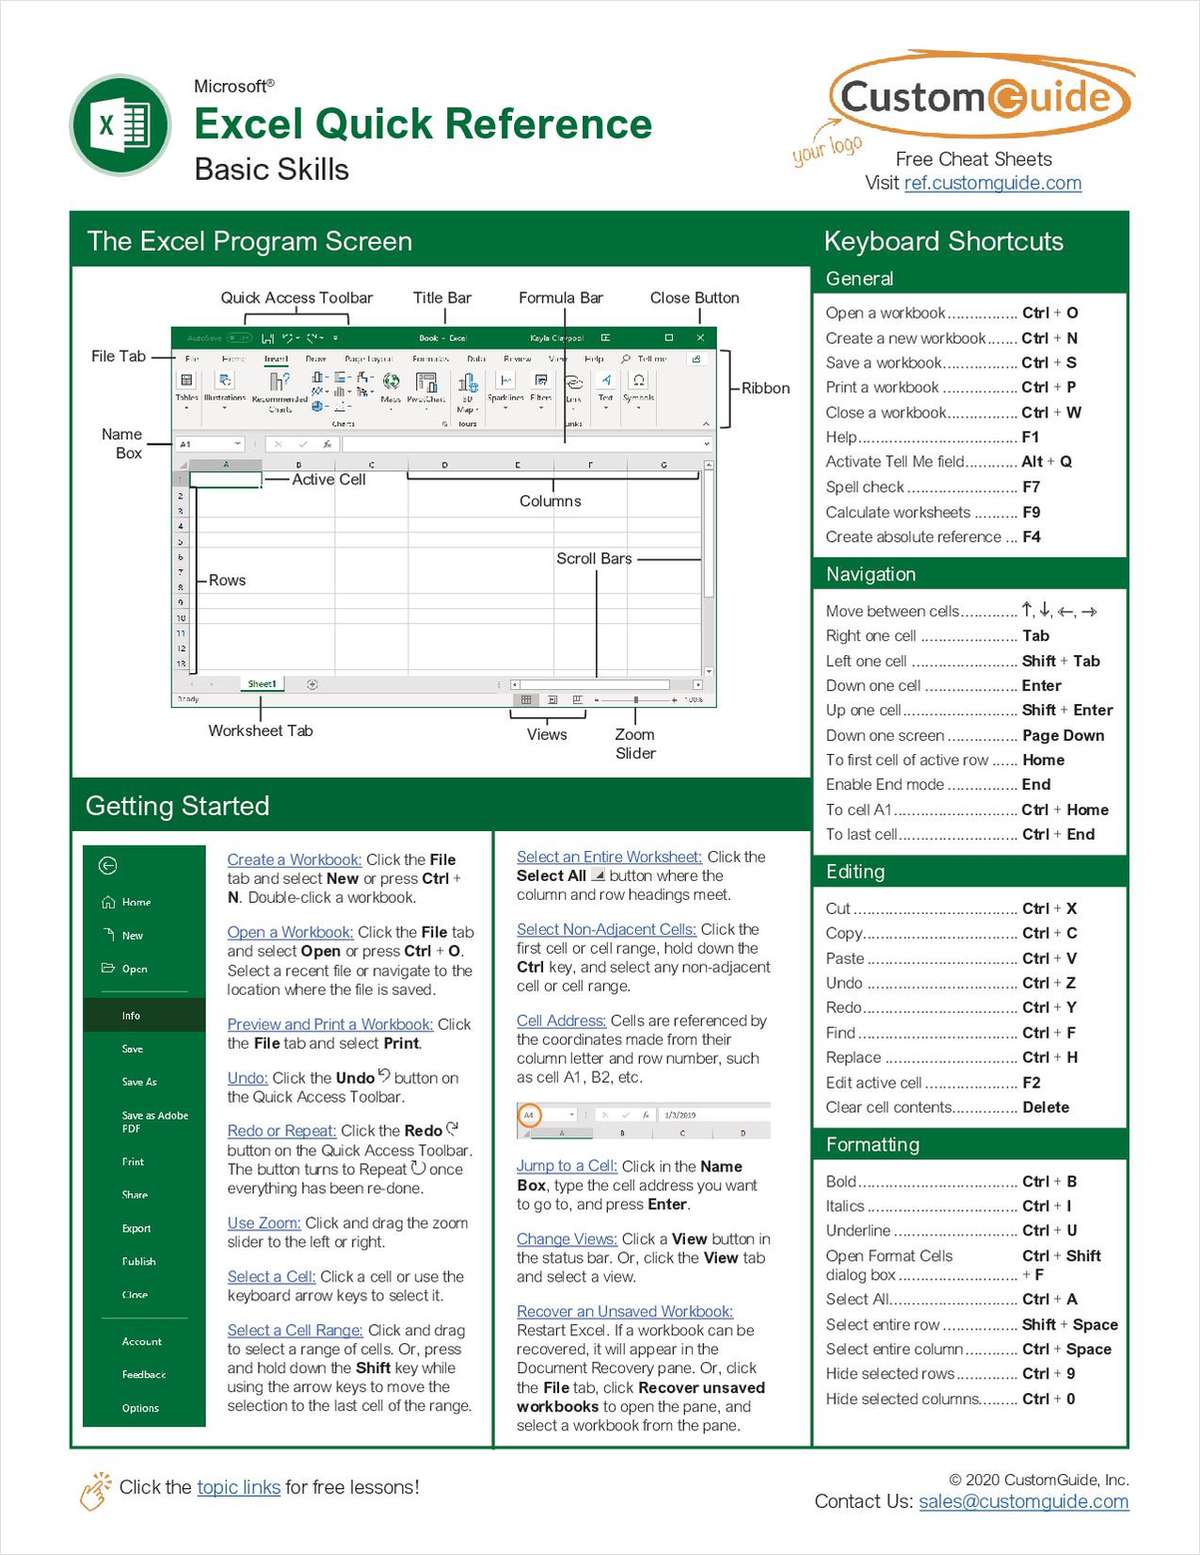 Microsoft Excel - Quick Reference Guide